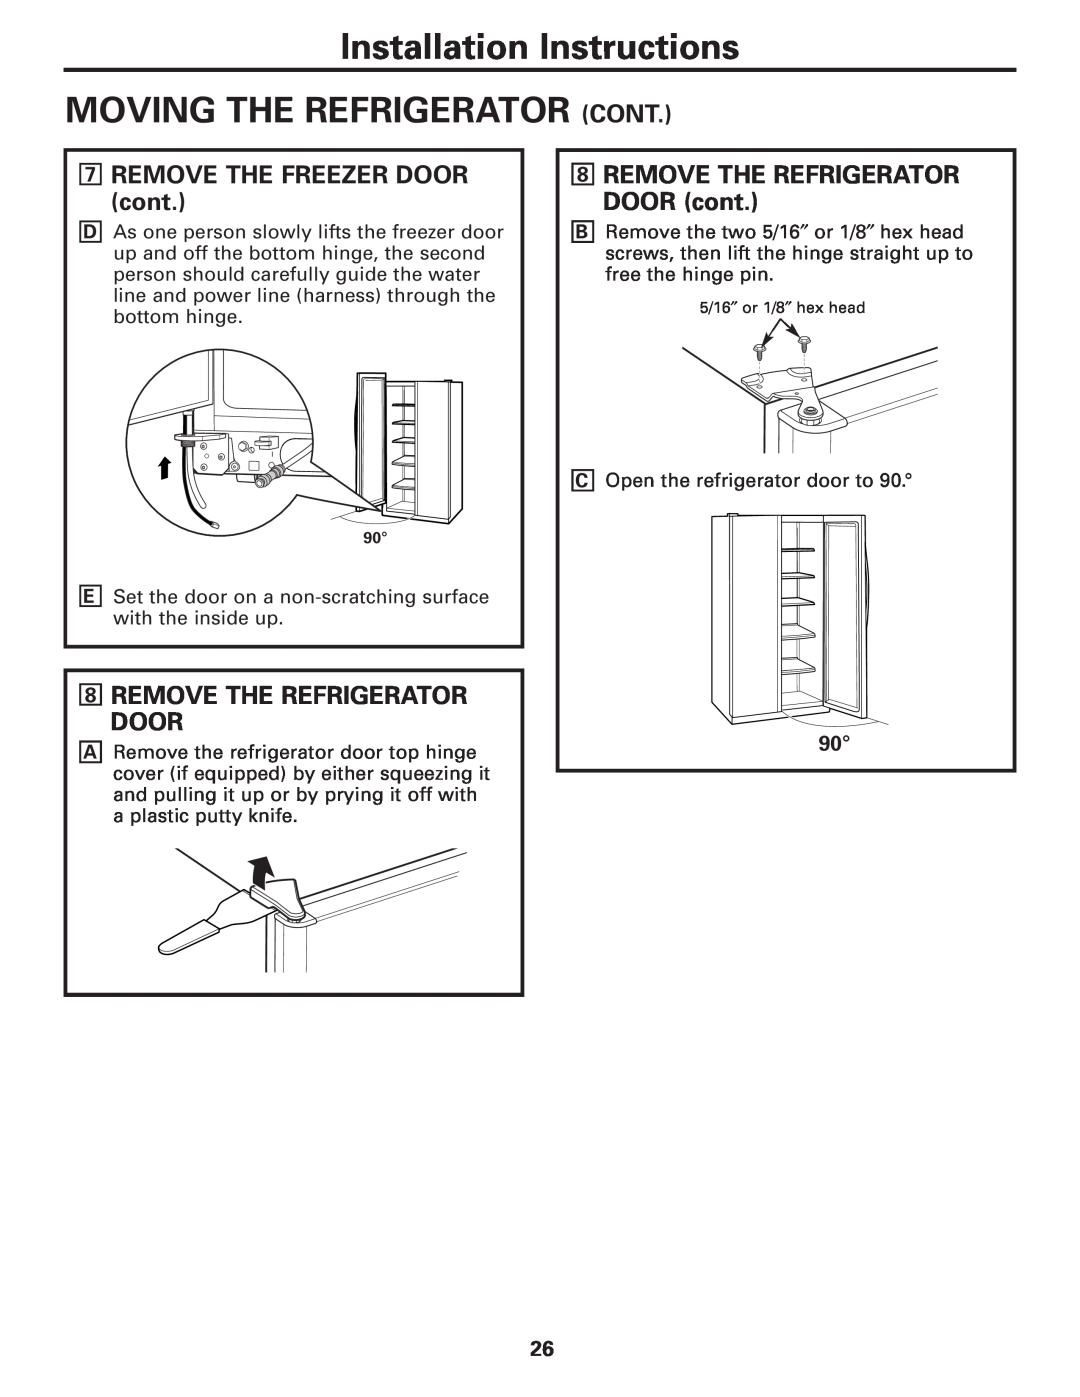 GE 200D8074P017 Installation Instructions MOVING THE REFRIGERATOR CONT, REMOVE THE FREEZER DOOR cont 